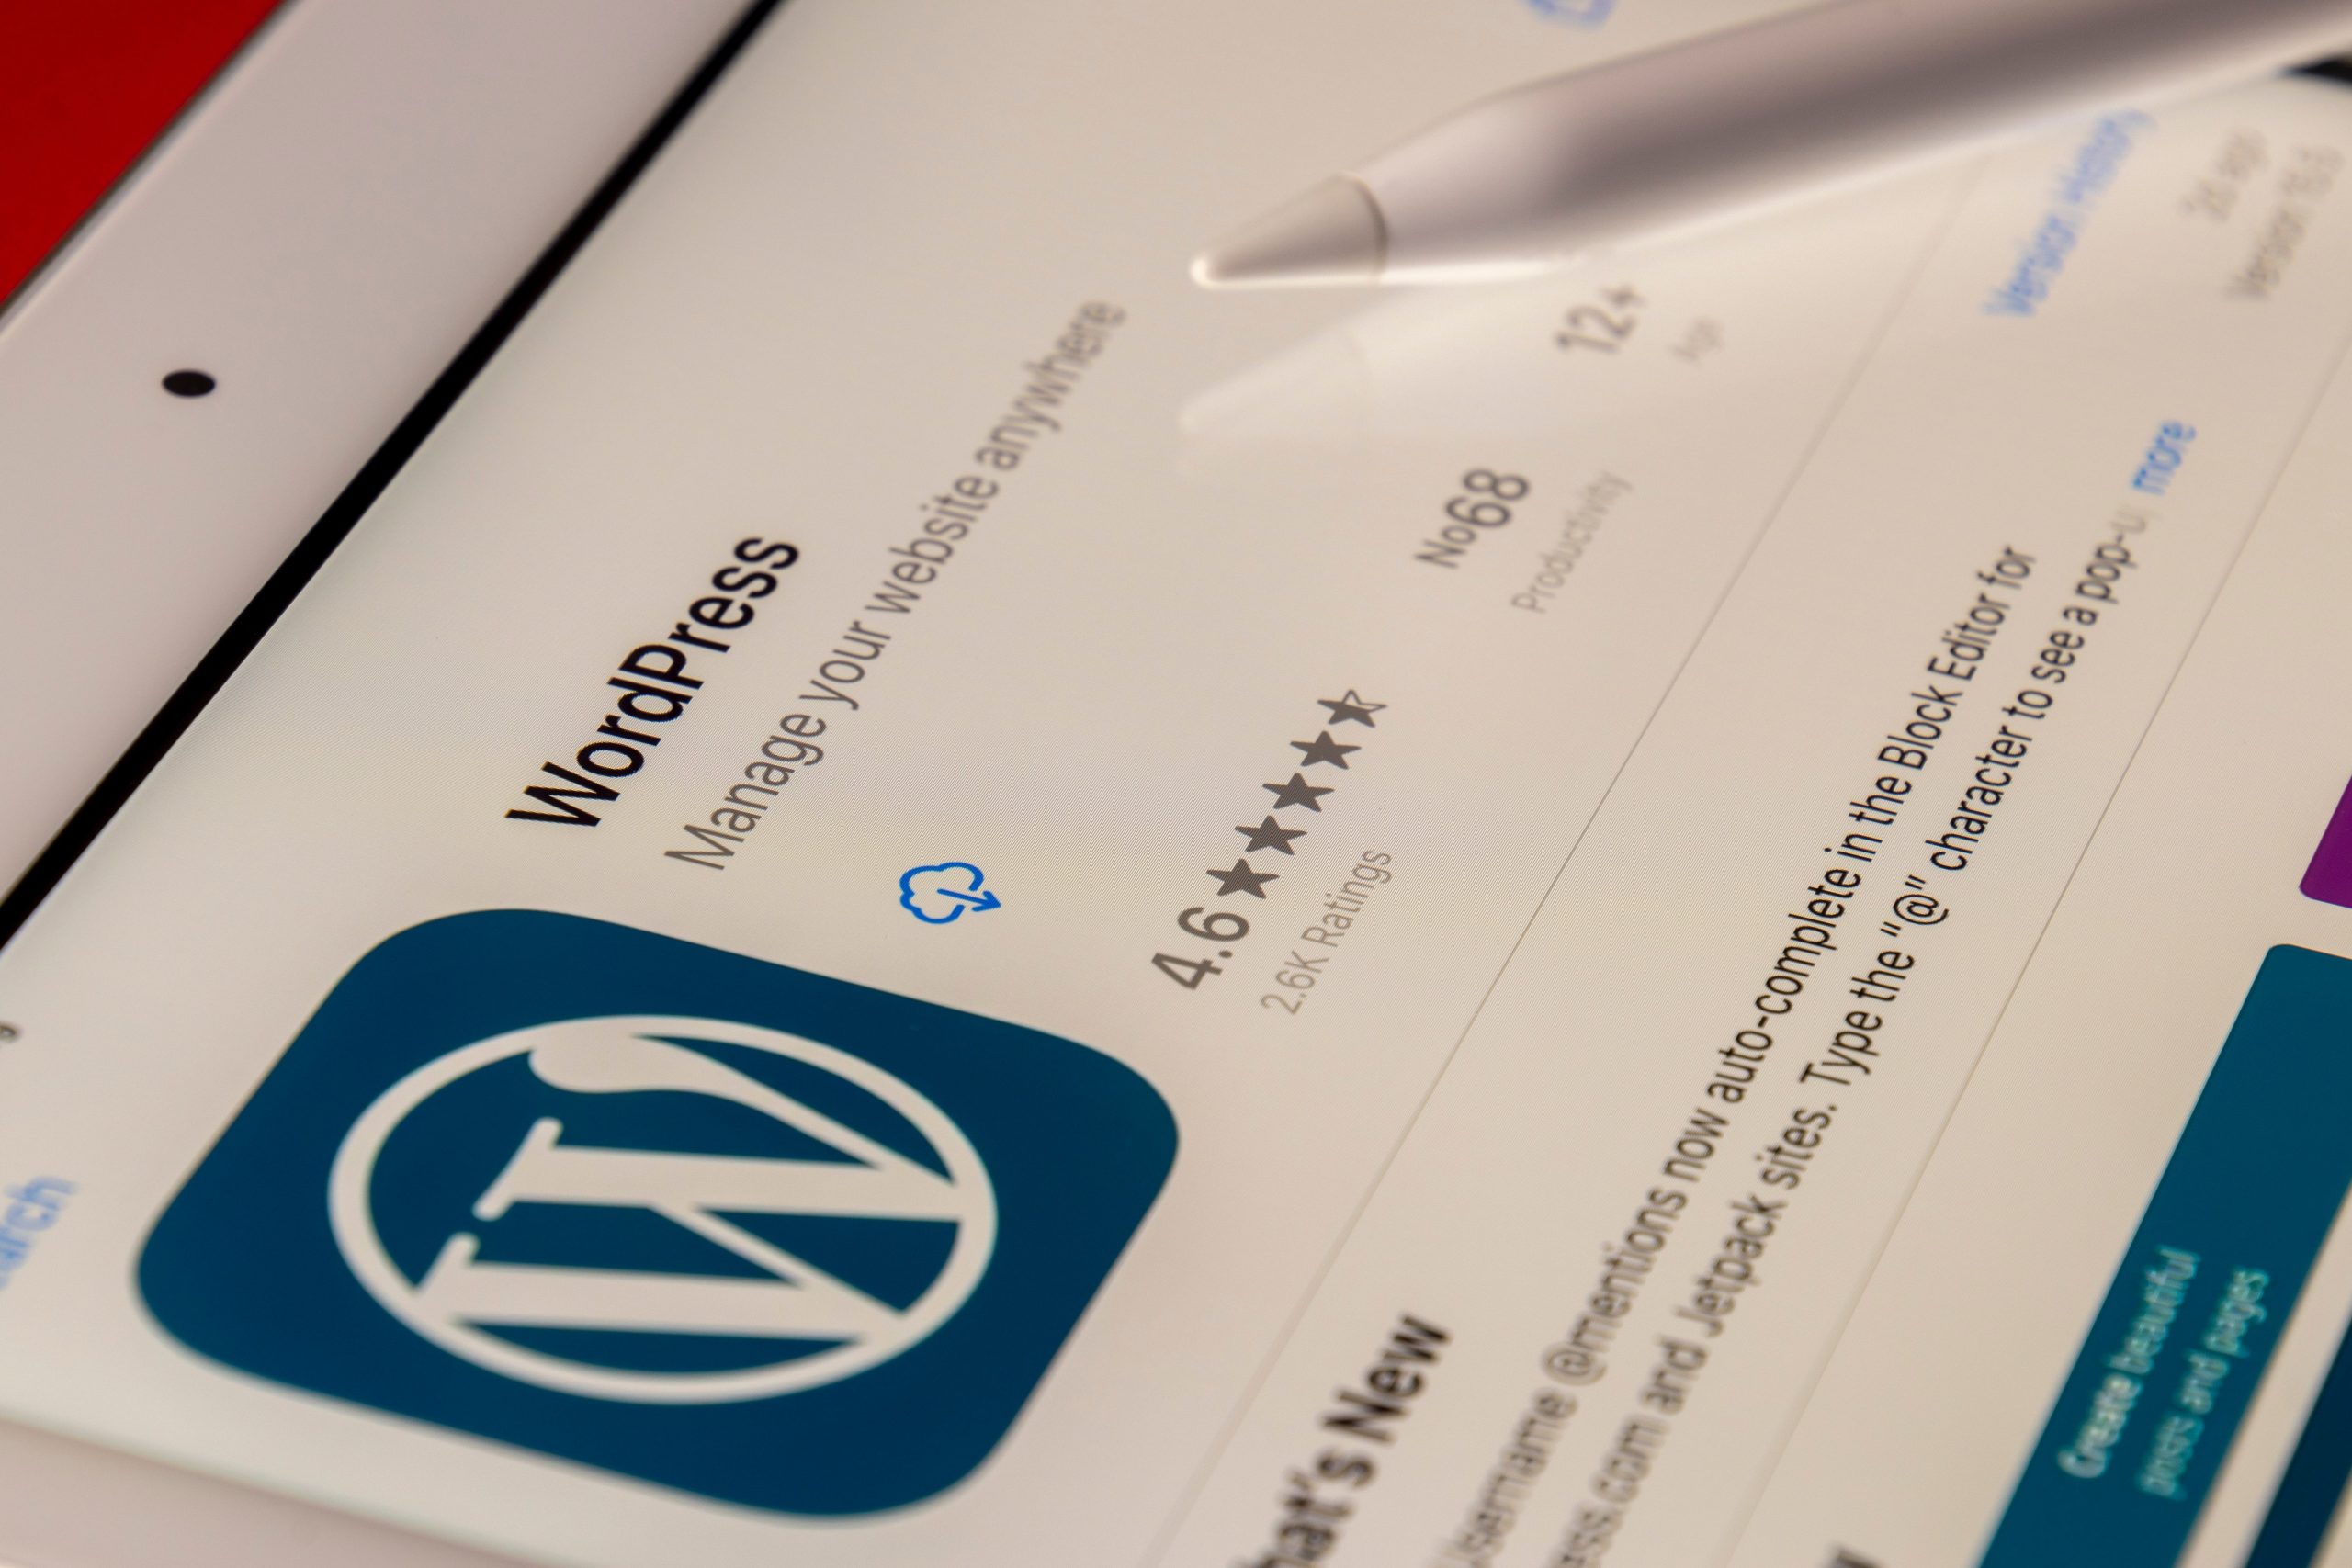 WordPress Admin Keeps Redirecting To Homepage? The Solution